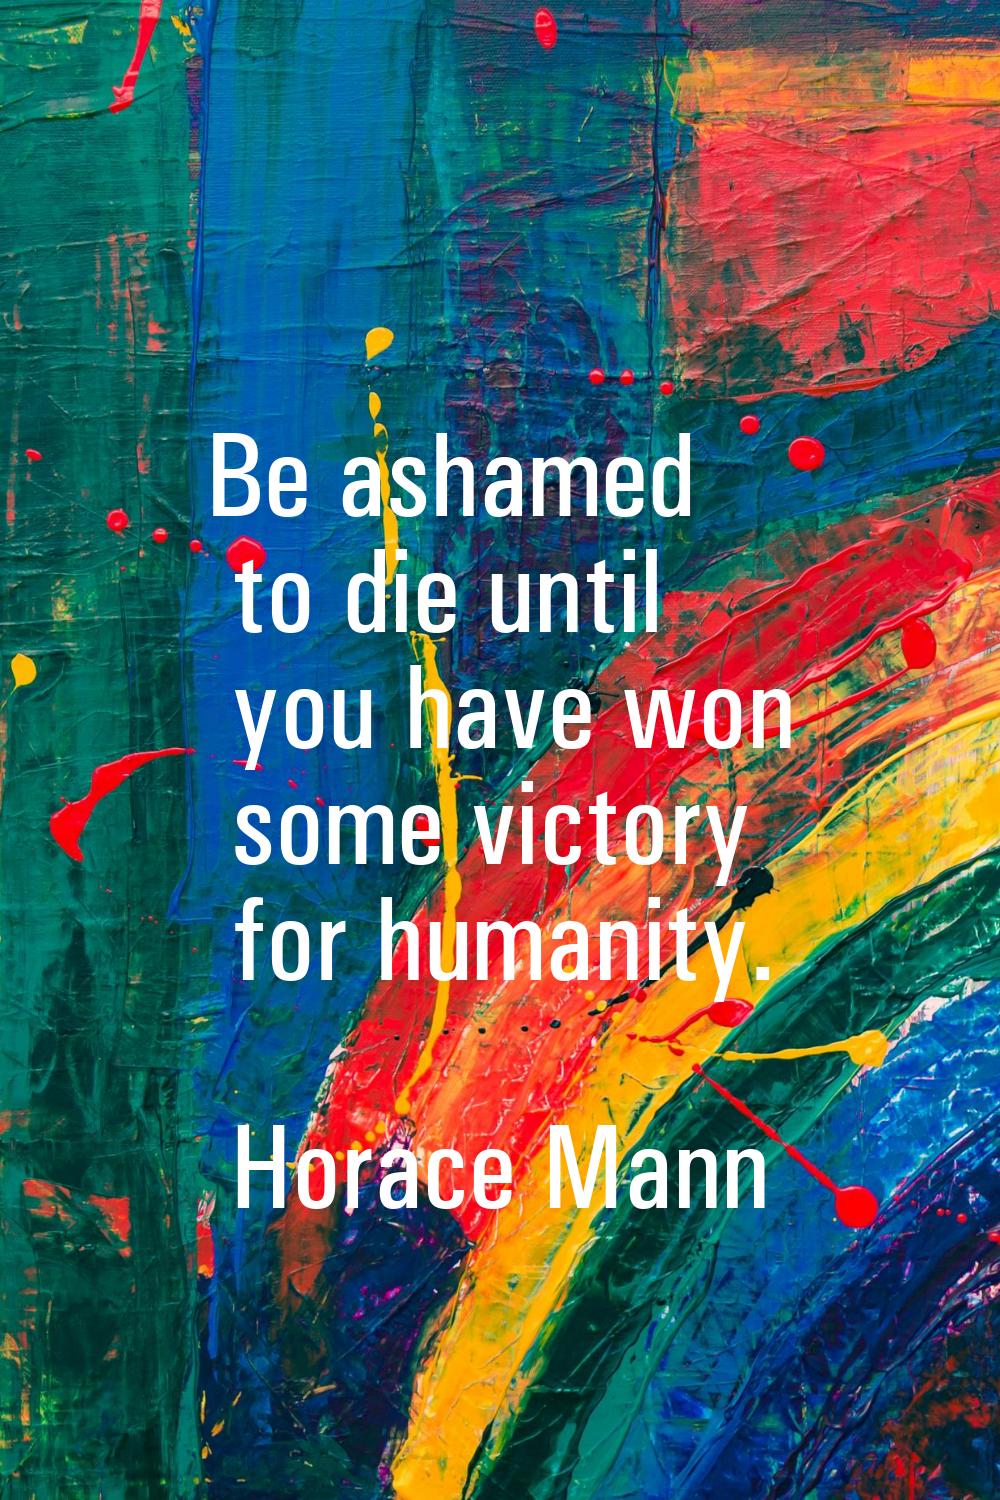 Be ashamed to die until you have won some victory for humanity.